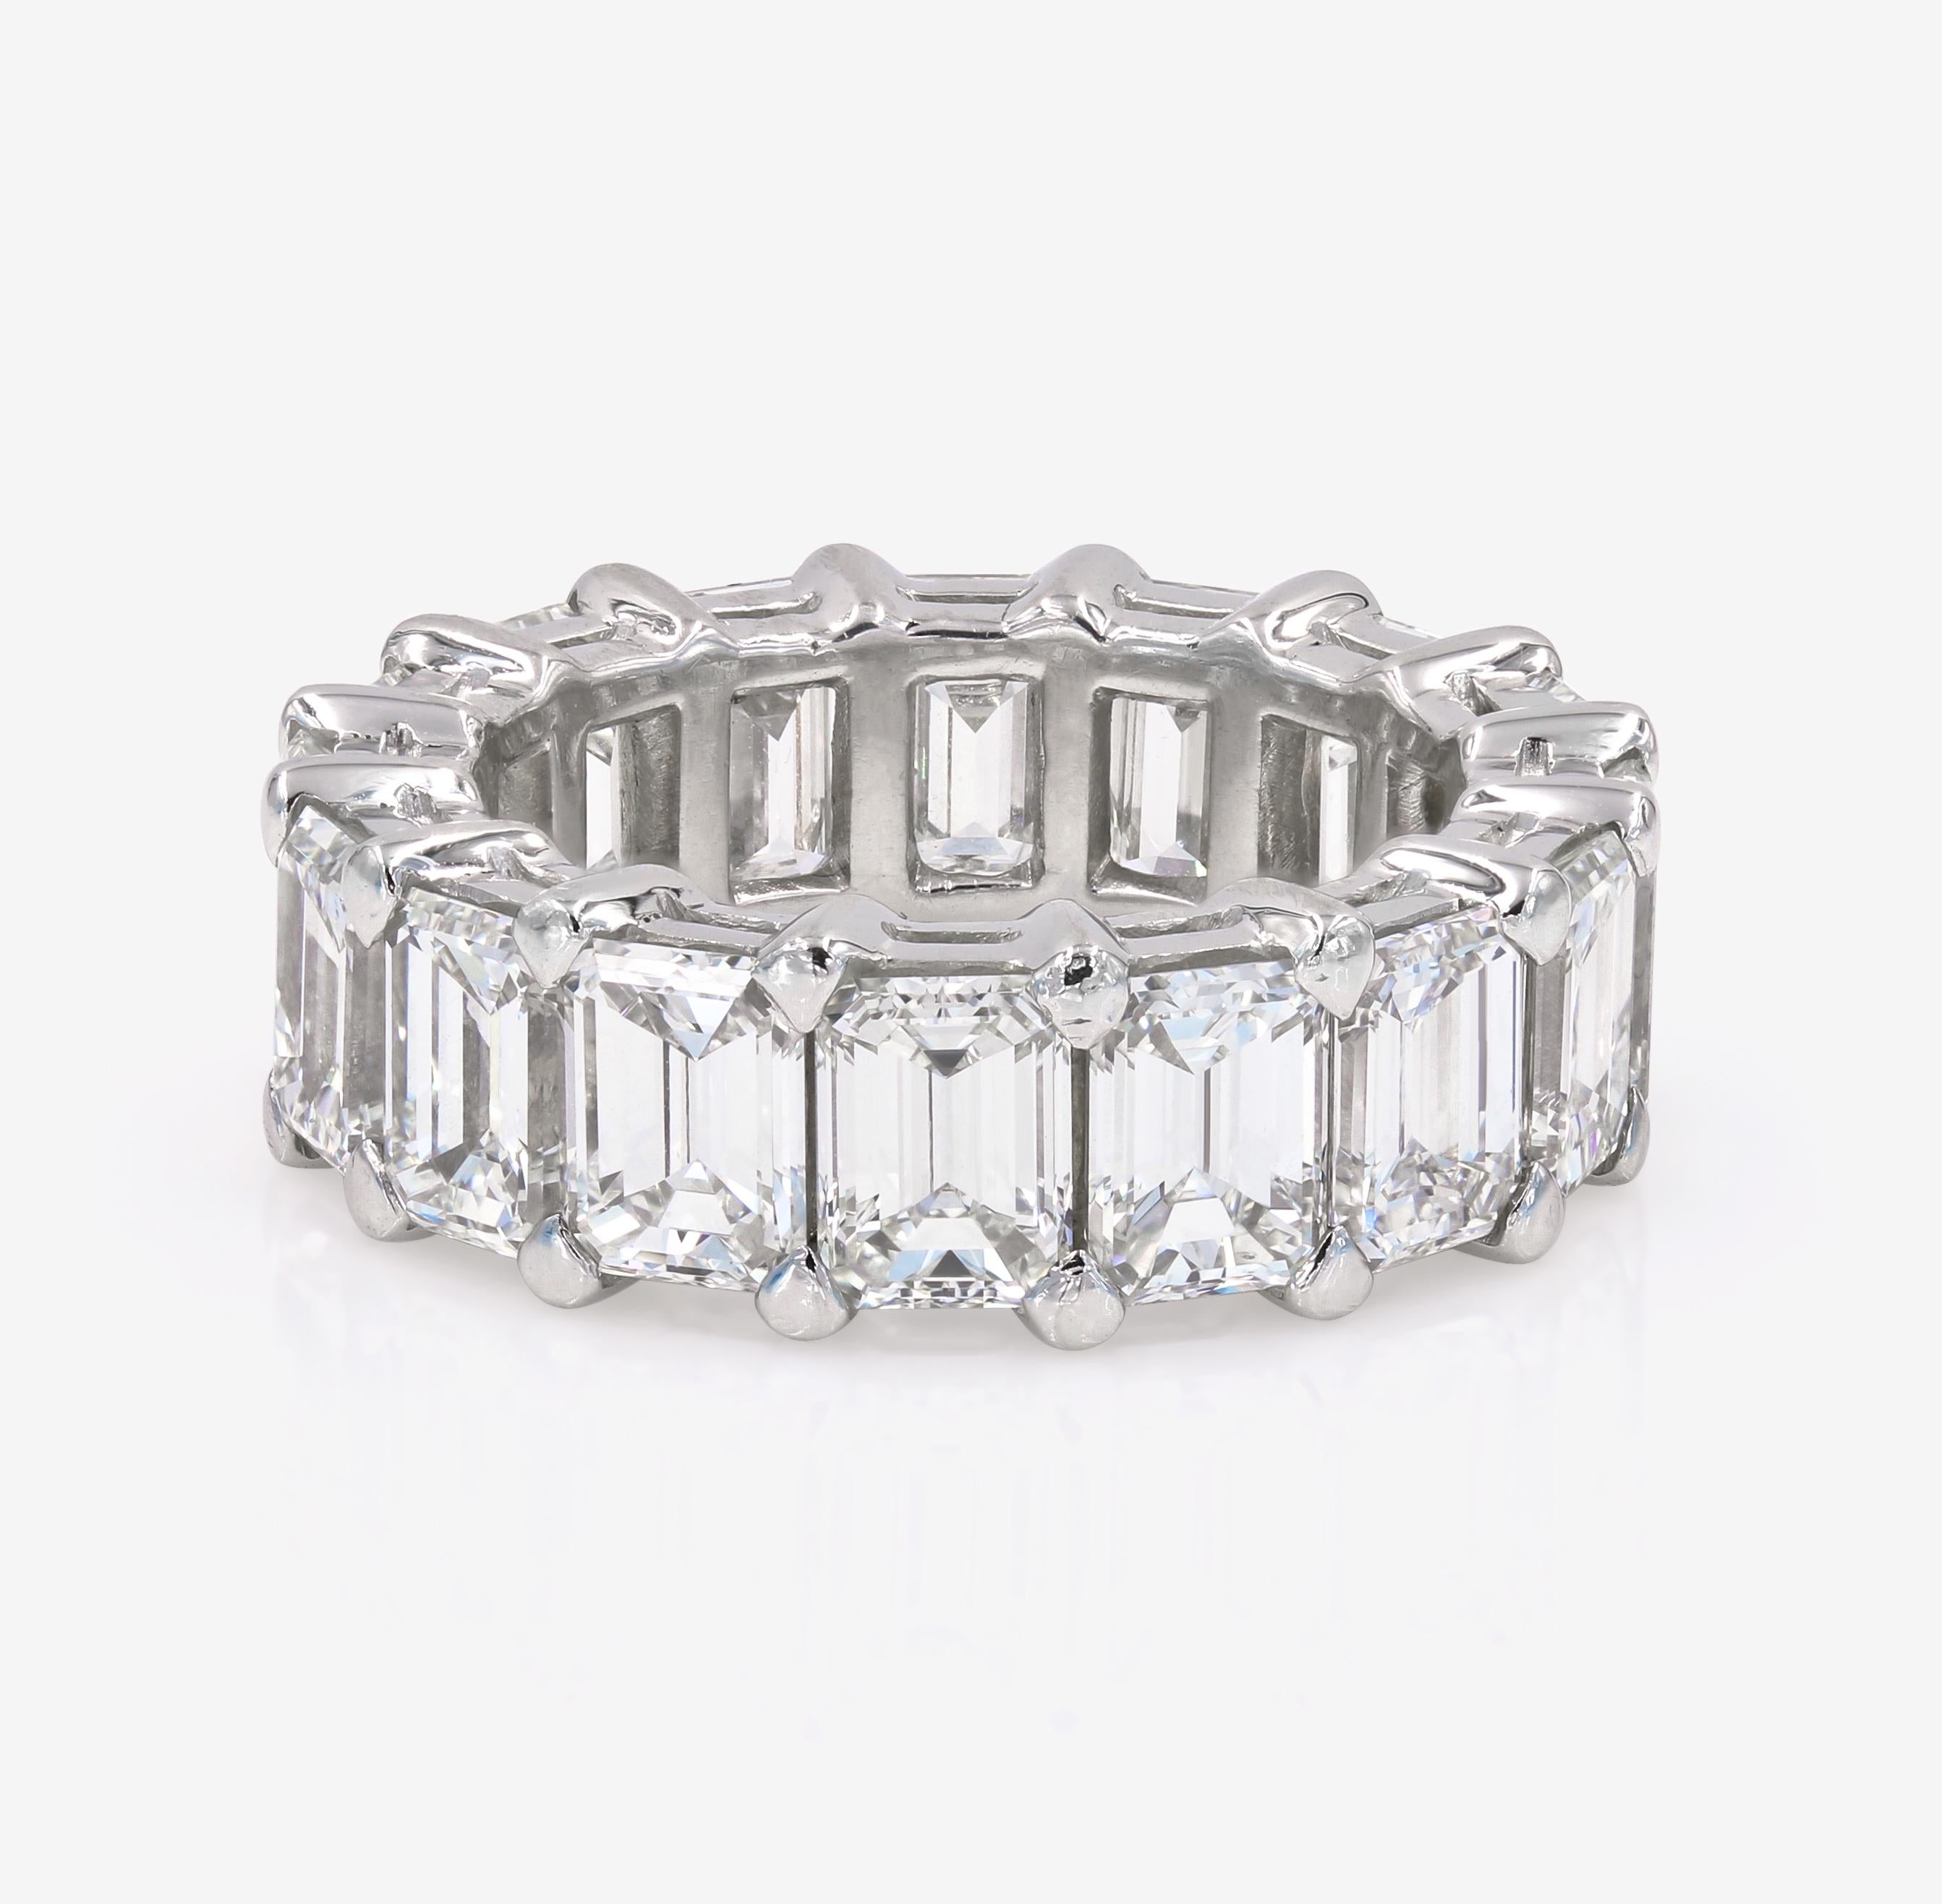 A beautifully made eternity band is set in platinum with 16 Emerald cut Diamonds = 12.16cts. tw. They average .76ct. each stone.

Diamonds are G-H Color and VS Clarity. Ring was hand made by us in 2005 and recently traded in.  The ring has been